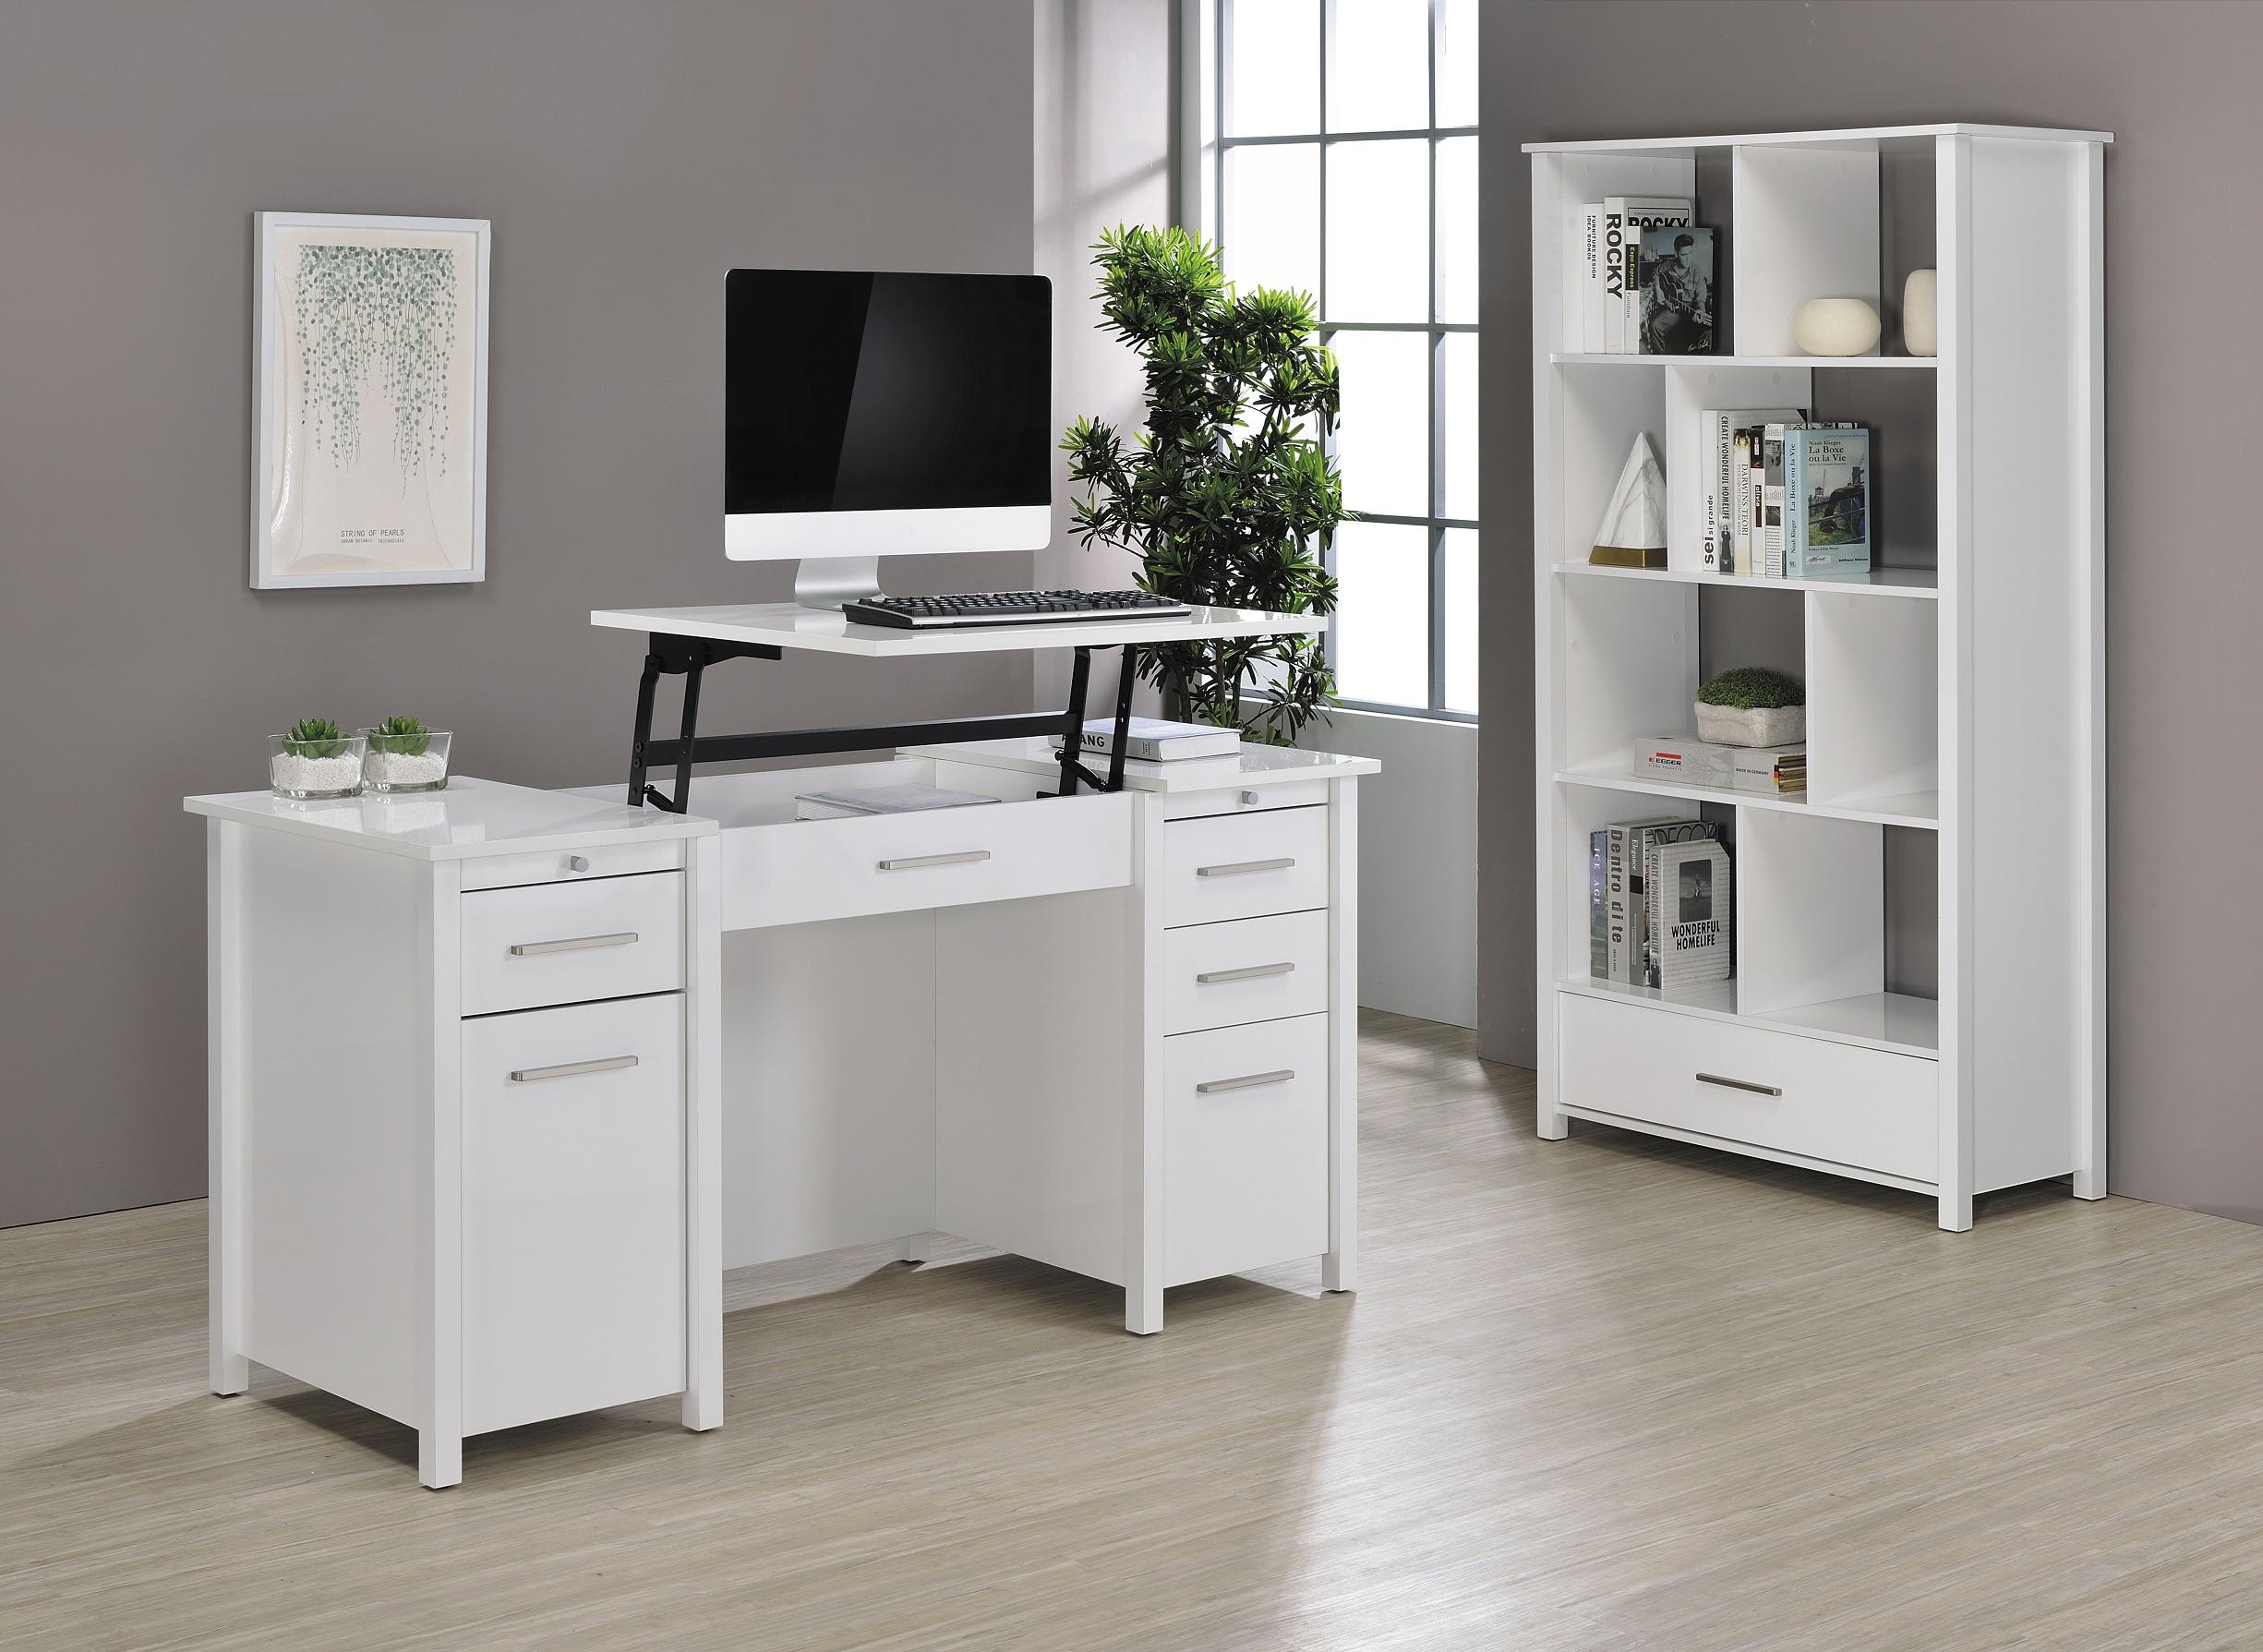 

    
Contemporary High Gloss White Wood Office Desk 2pcs Coaster 801573-S2 Dylan
